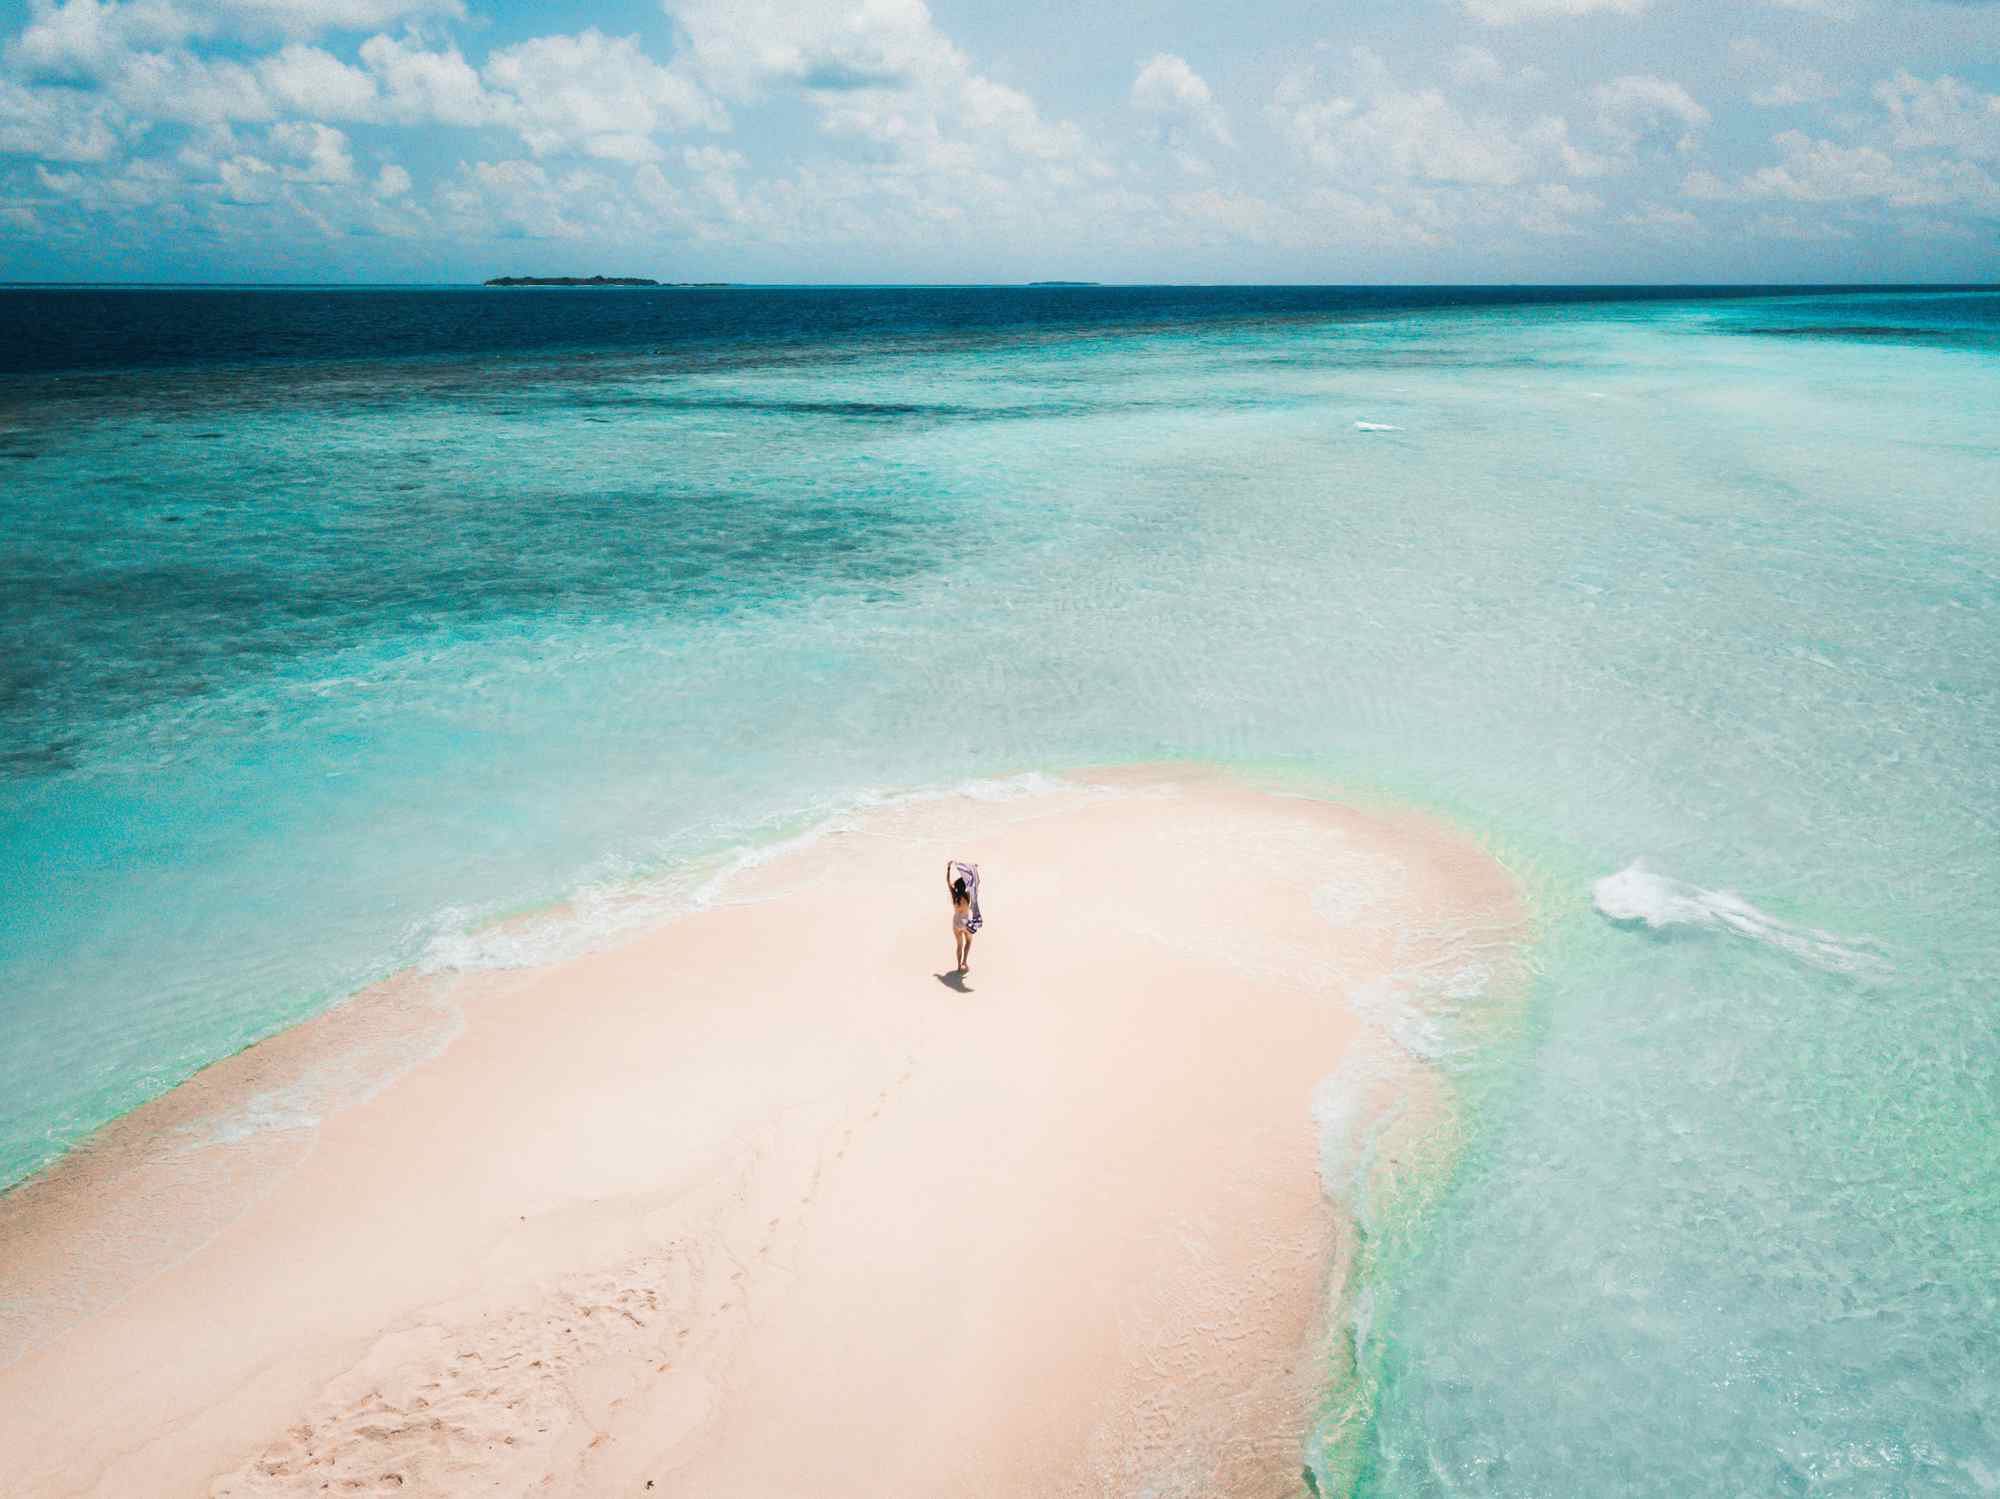 An aerial photograph of a person stood on a white sandbar surrounding by clear, turquoise, water.